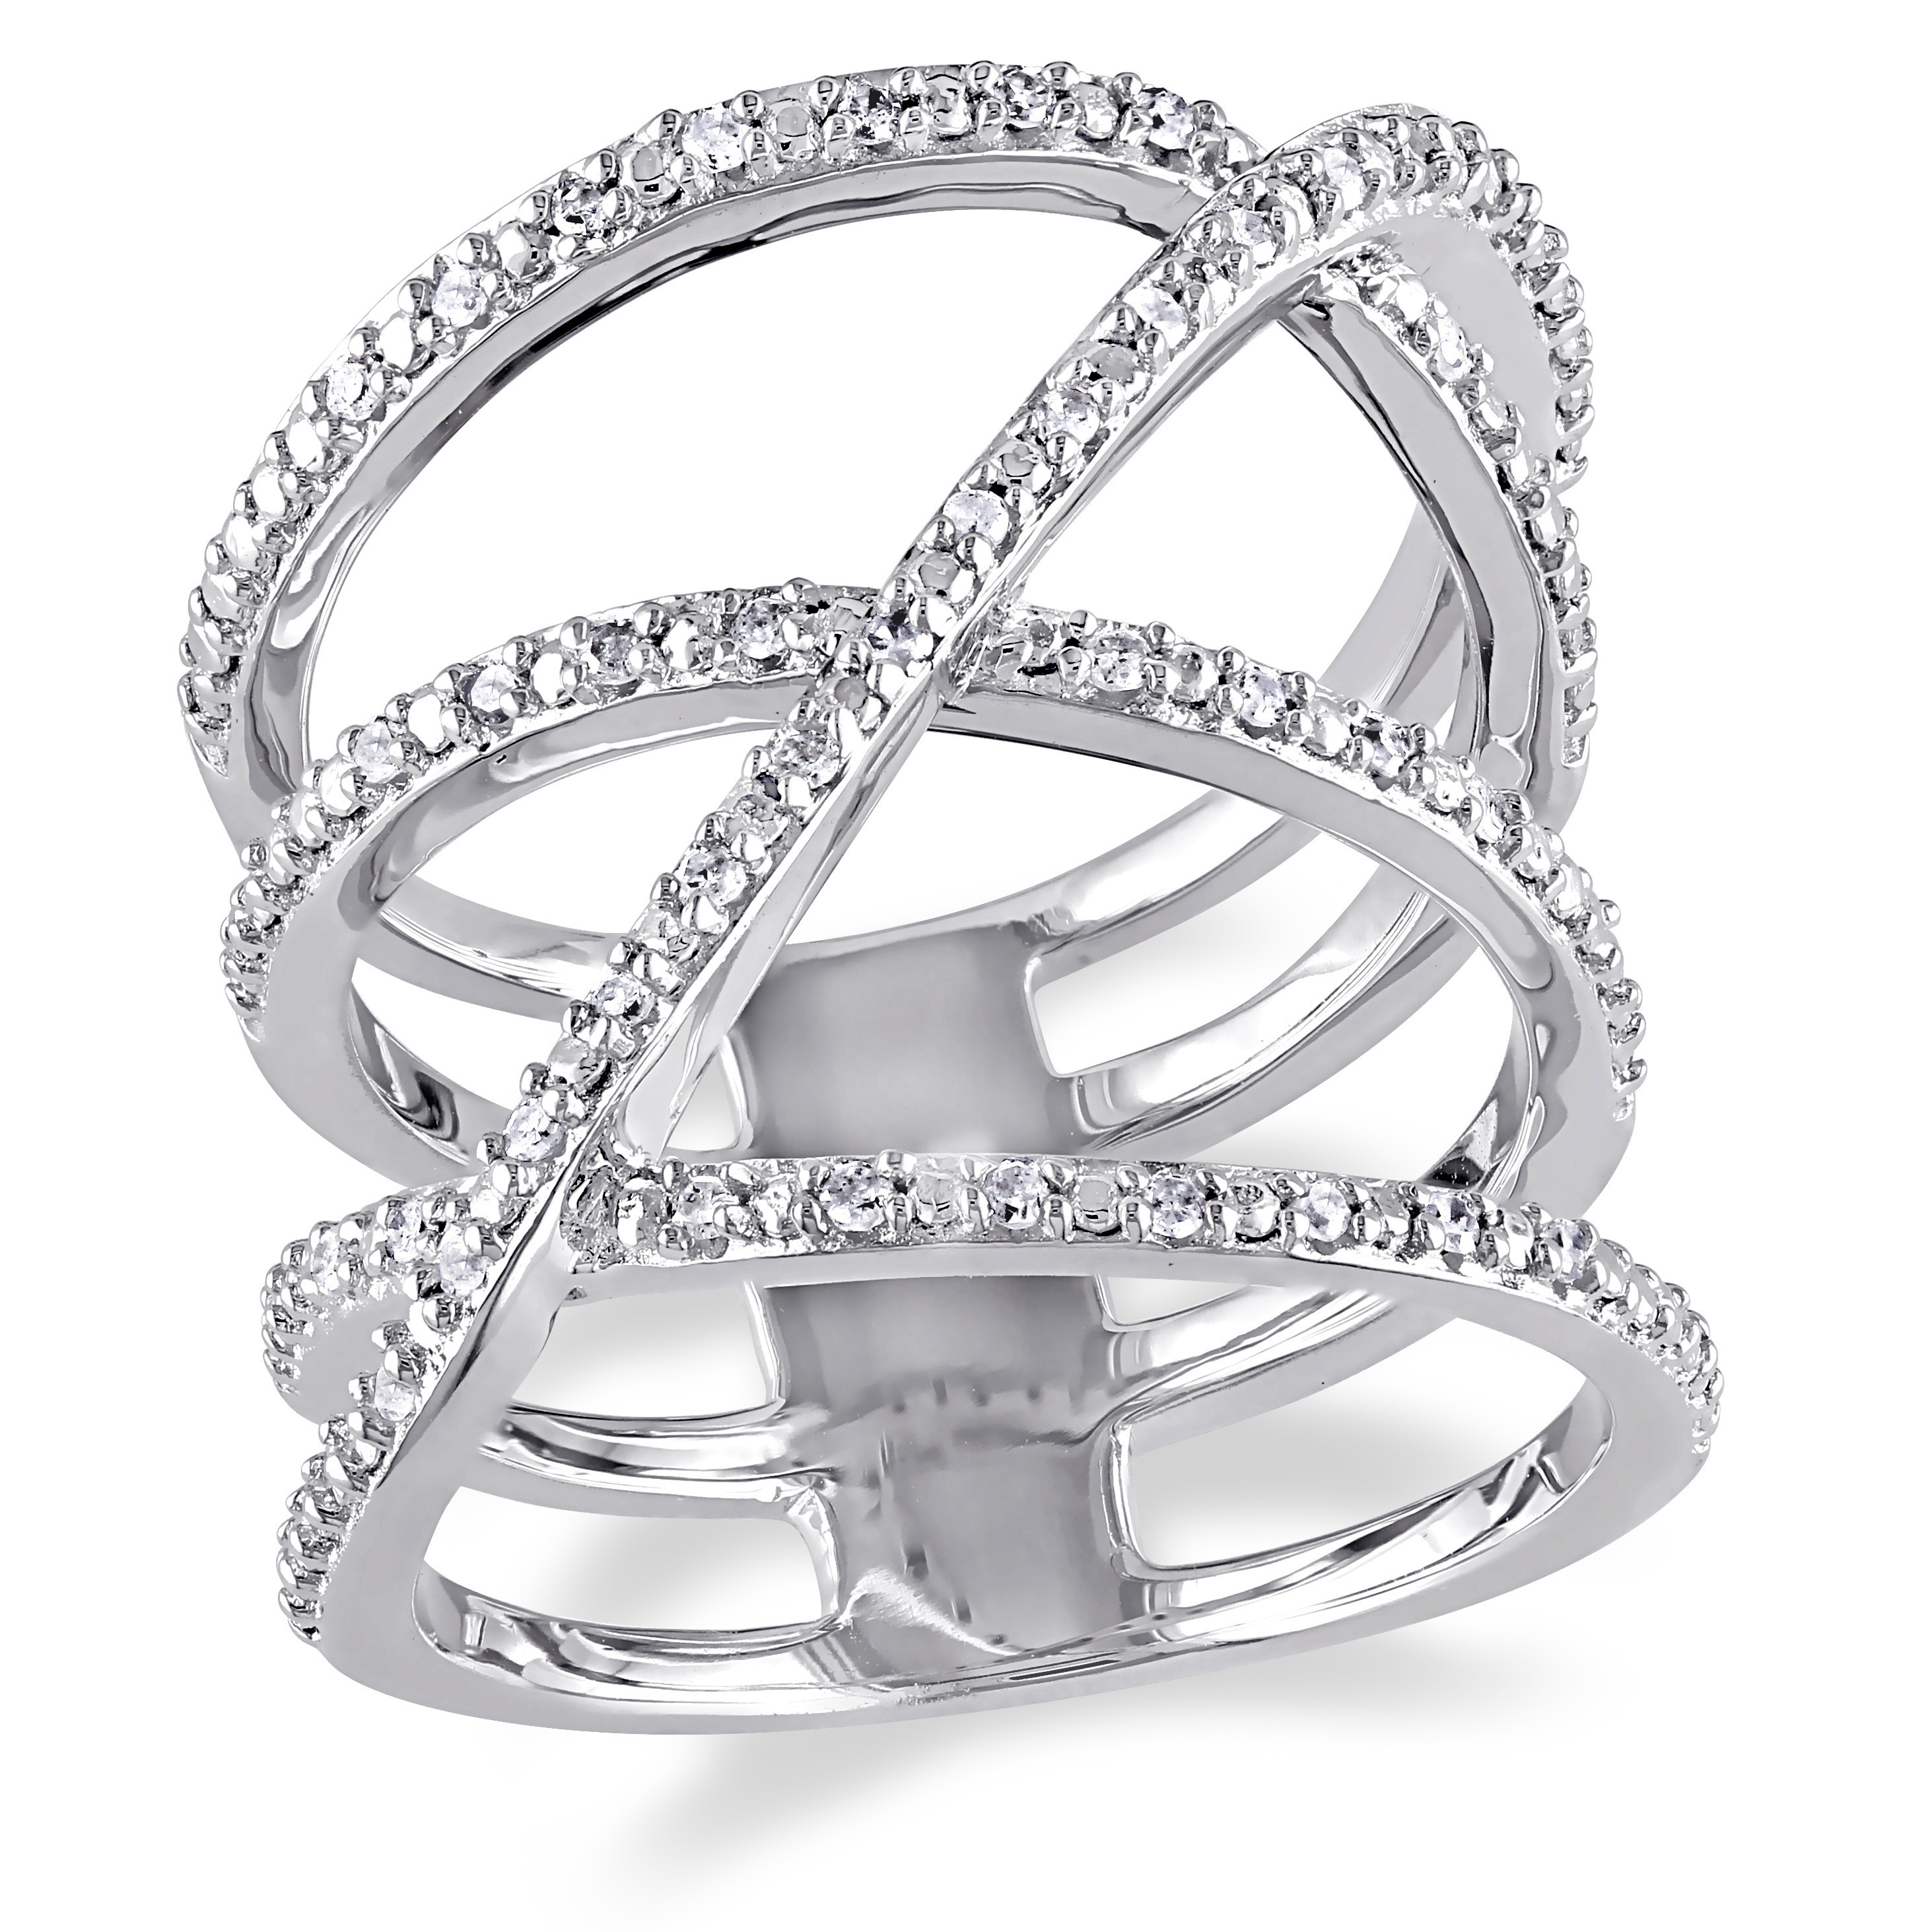 1/5 CT TW Diamond Crossover Ring in Sterling Silver